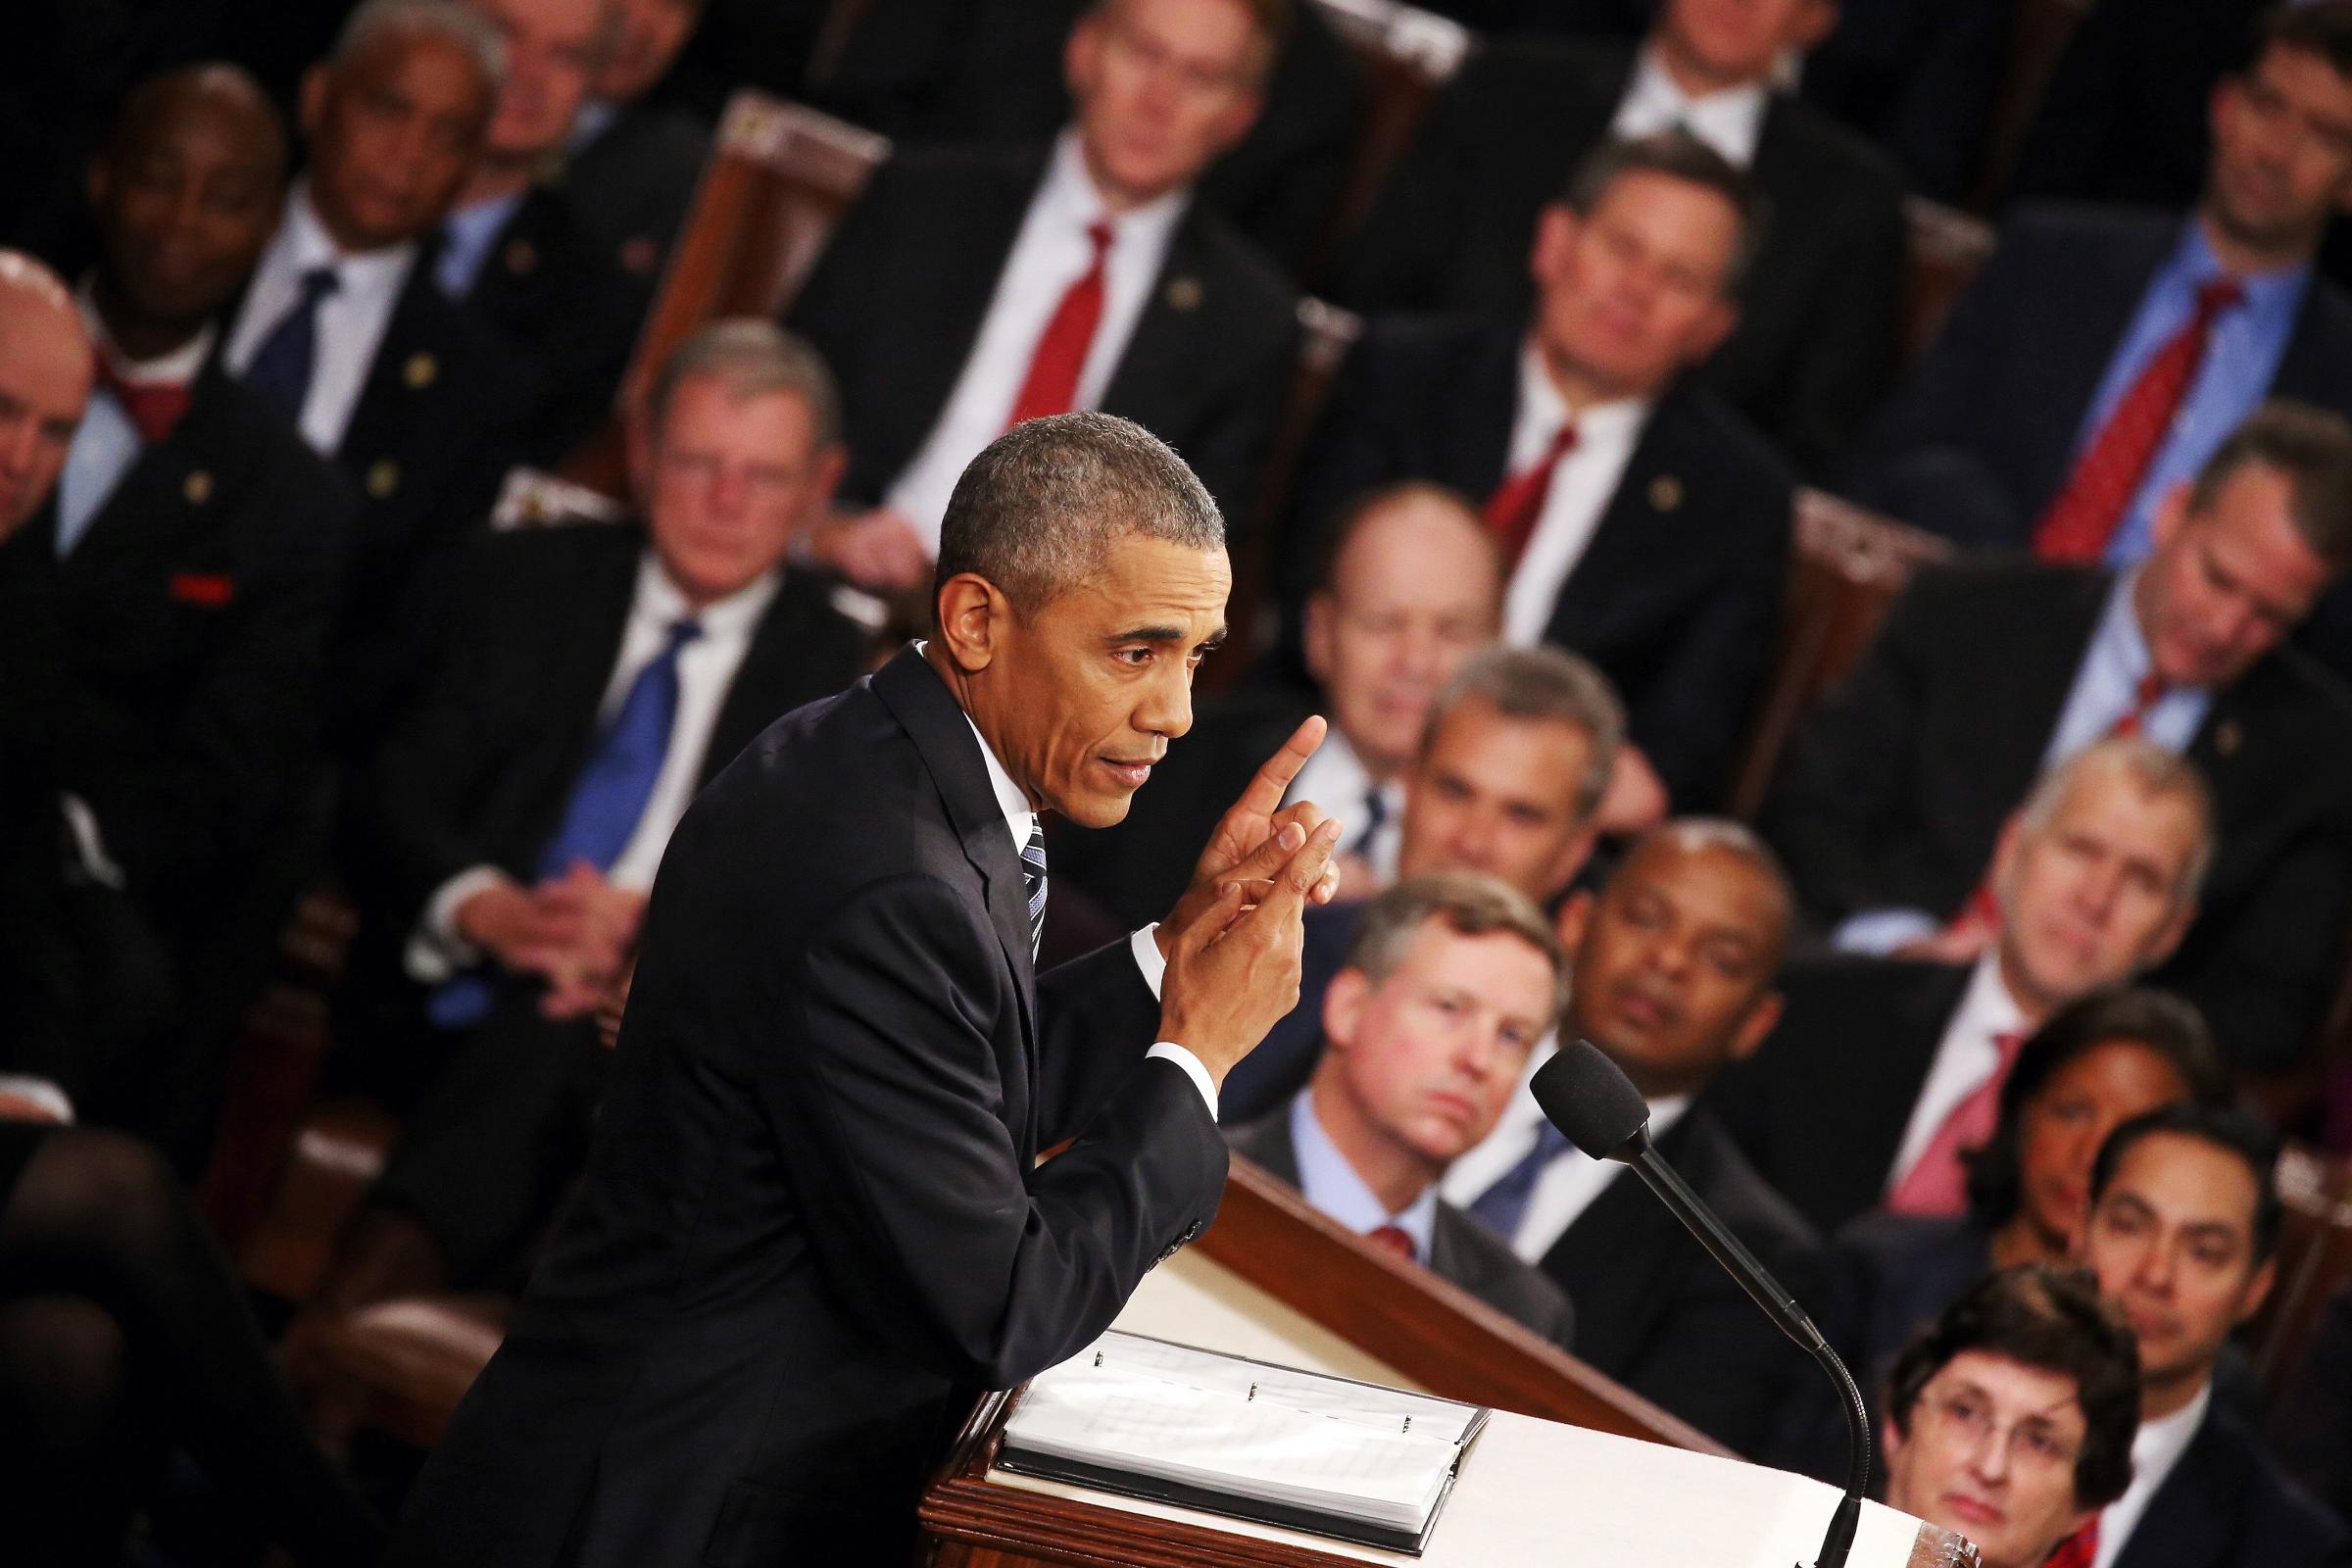 President Barack Obama gestures as he delivers the State of the Union speech before members of Congress in the House chamber of the U.S. Capitol on Jan. 12, 2016 in Washington.